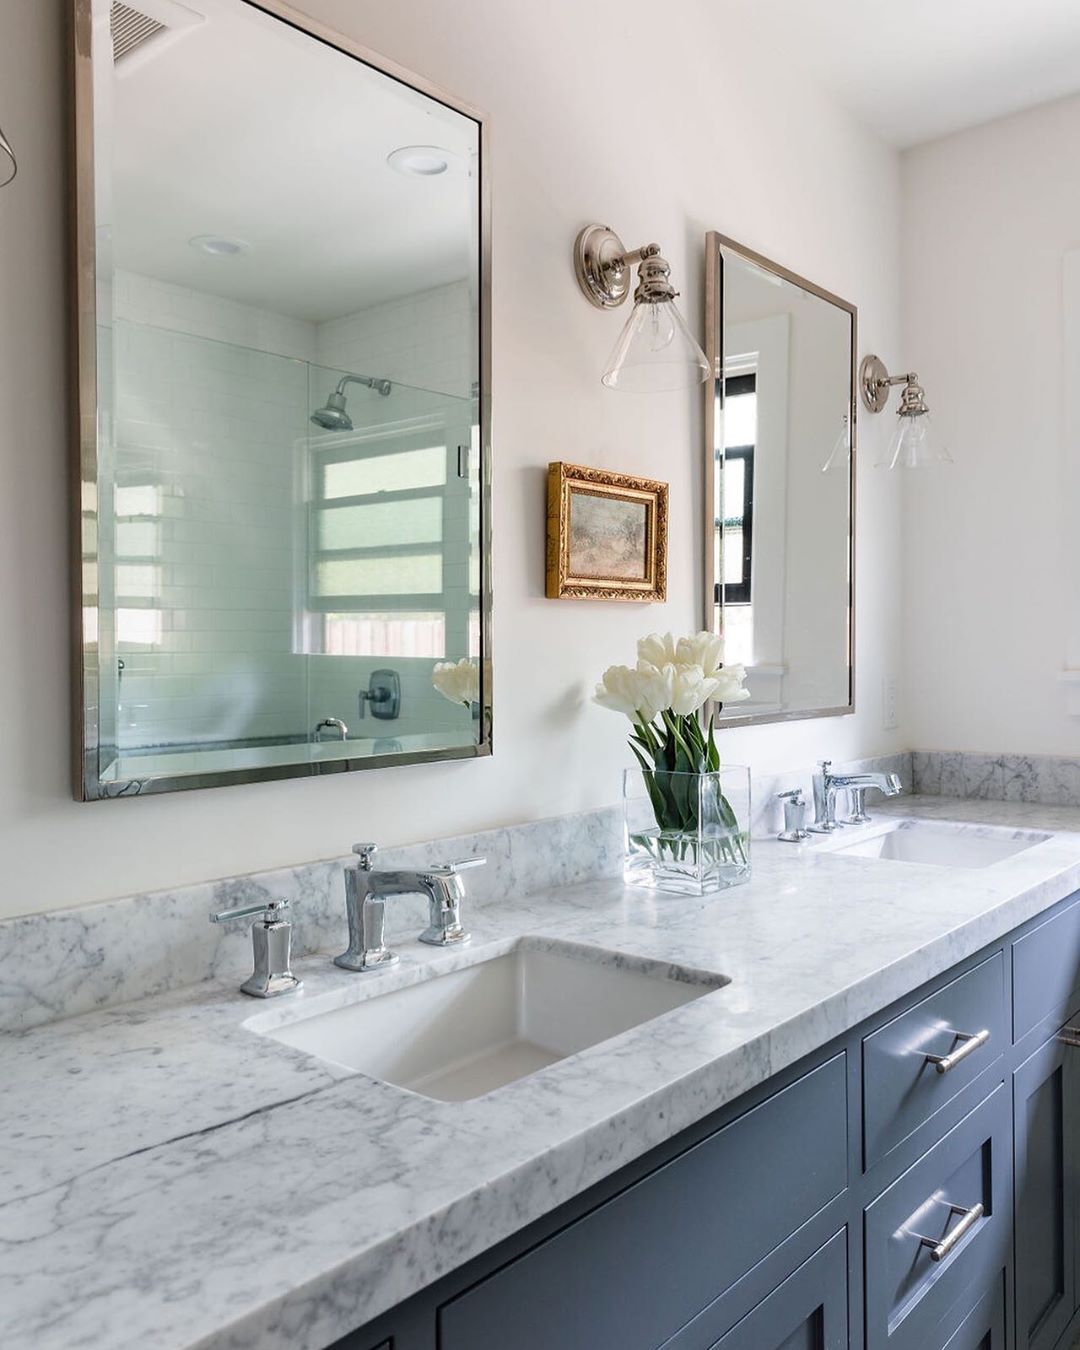 His and hers sinks in bathroom with small decorative accents. Photo by Instagram user @blairdesignandinteriors